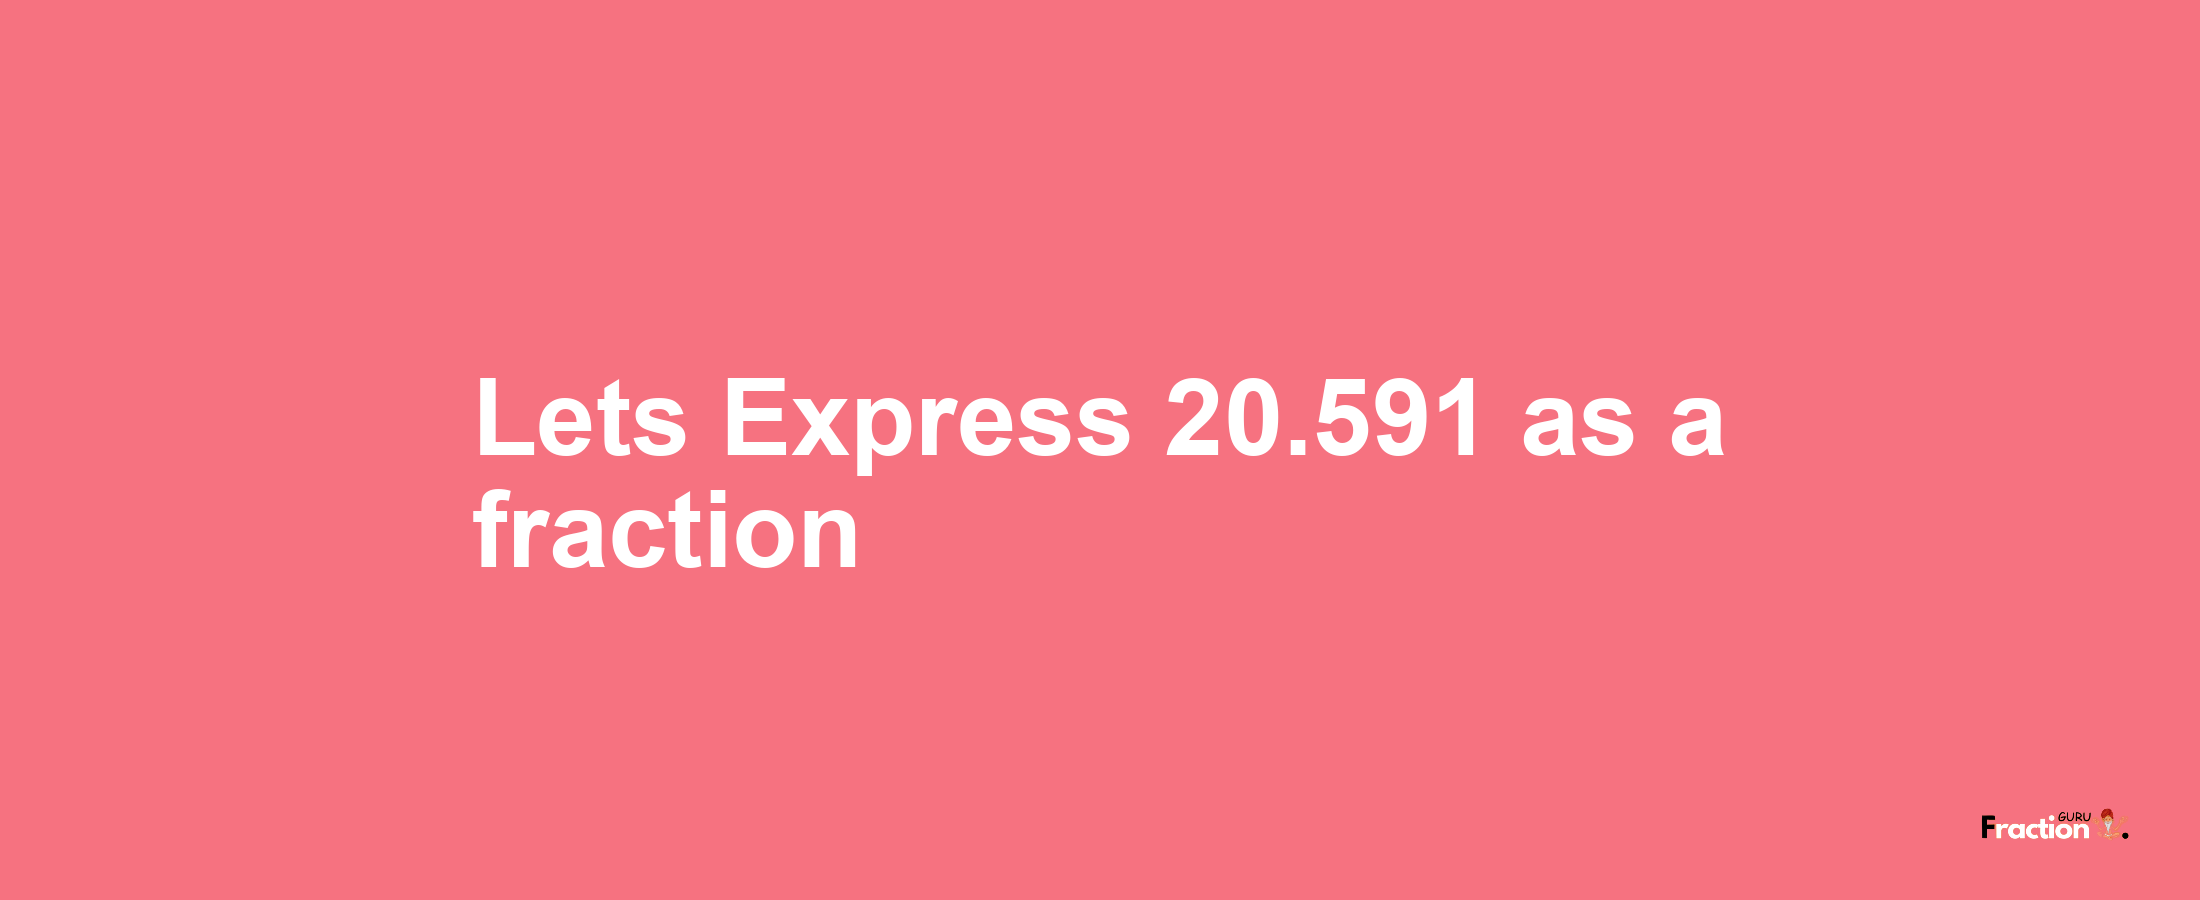 Lets Express 20.591 as afraction